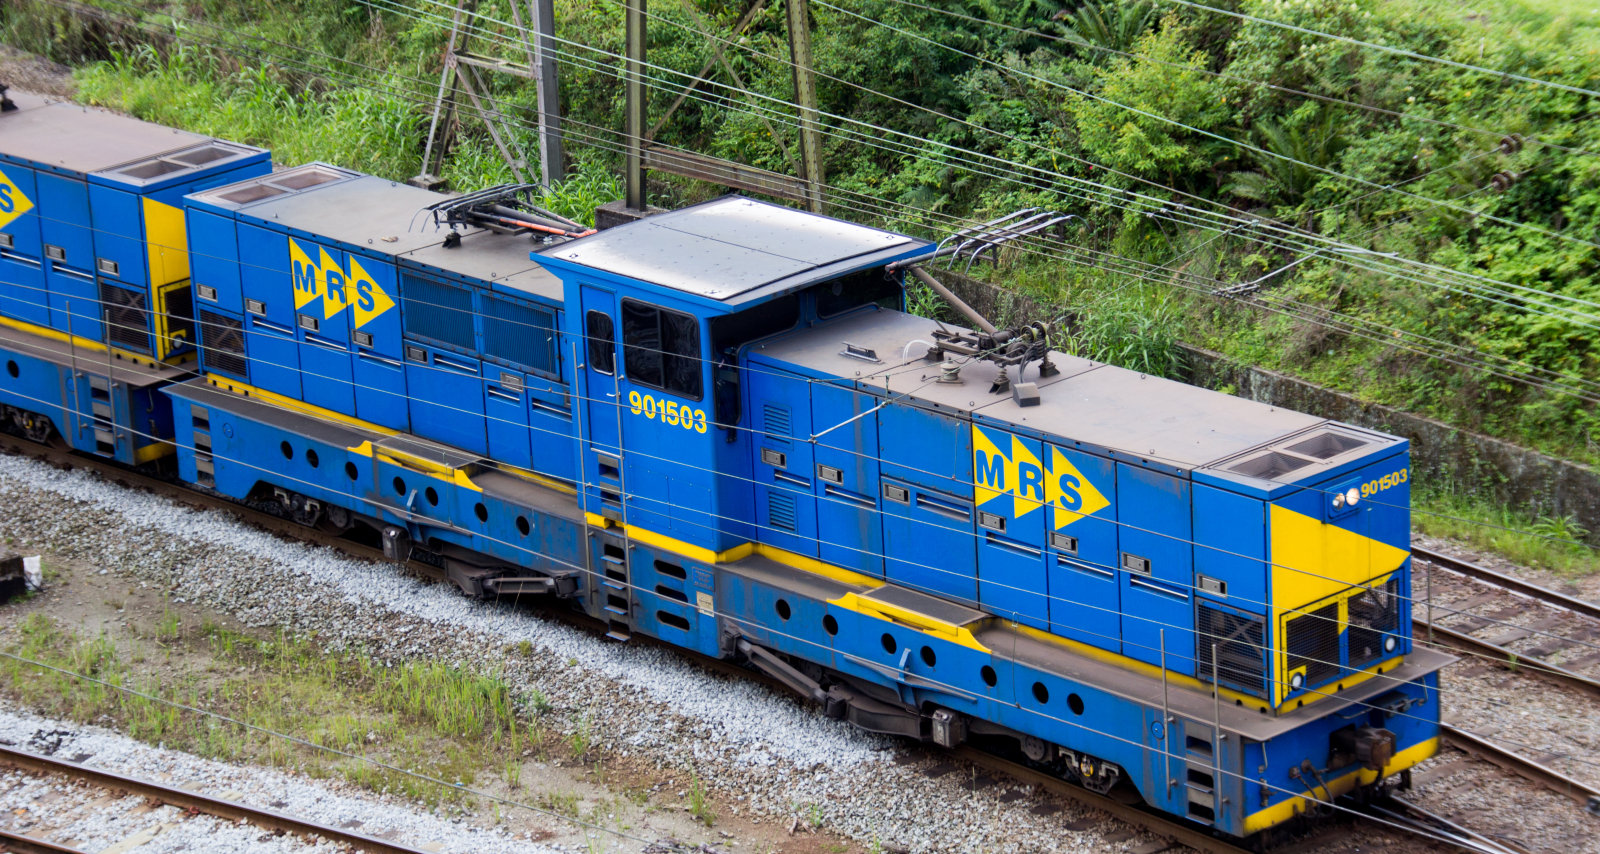 No. 901503 with a second locomotive in multiple in March 2017 near Santo André, São Paulo